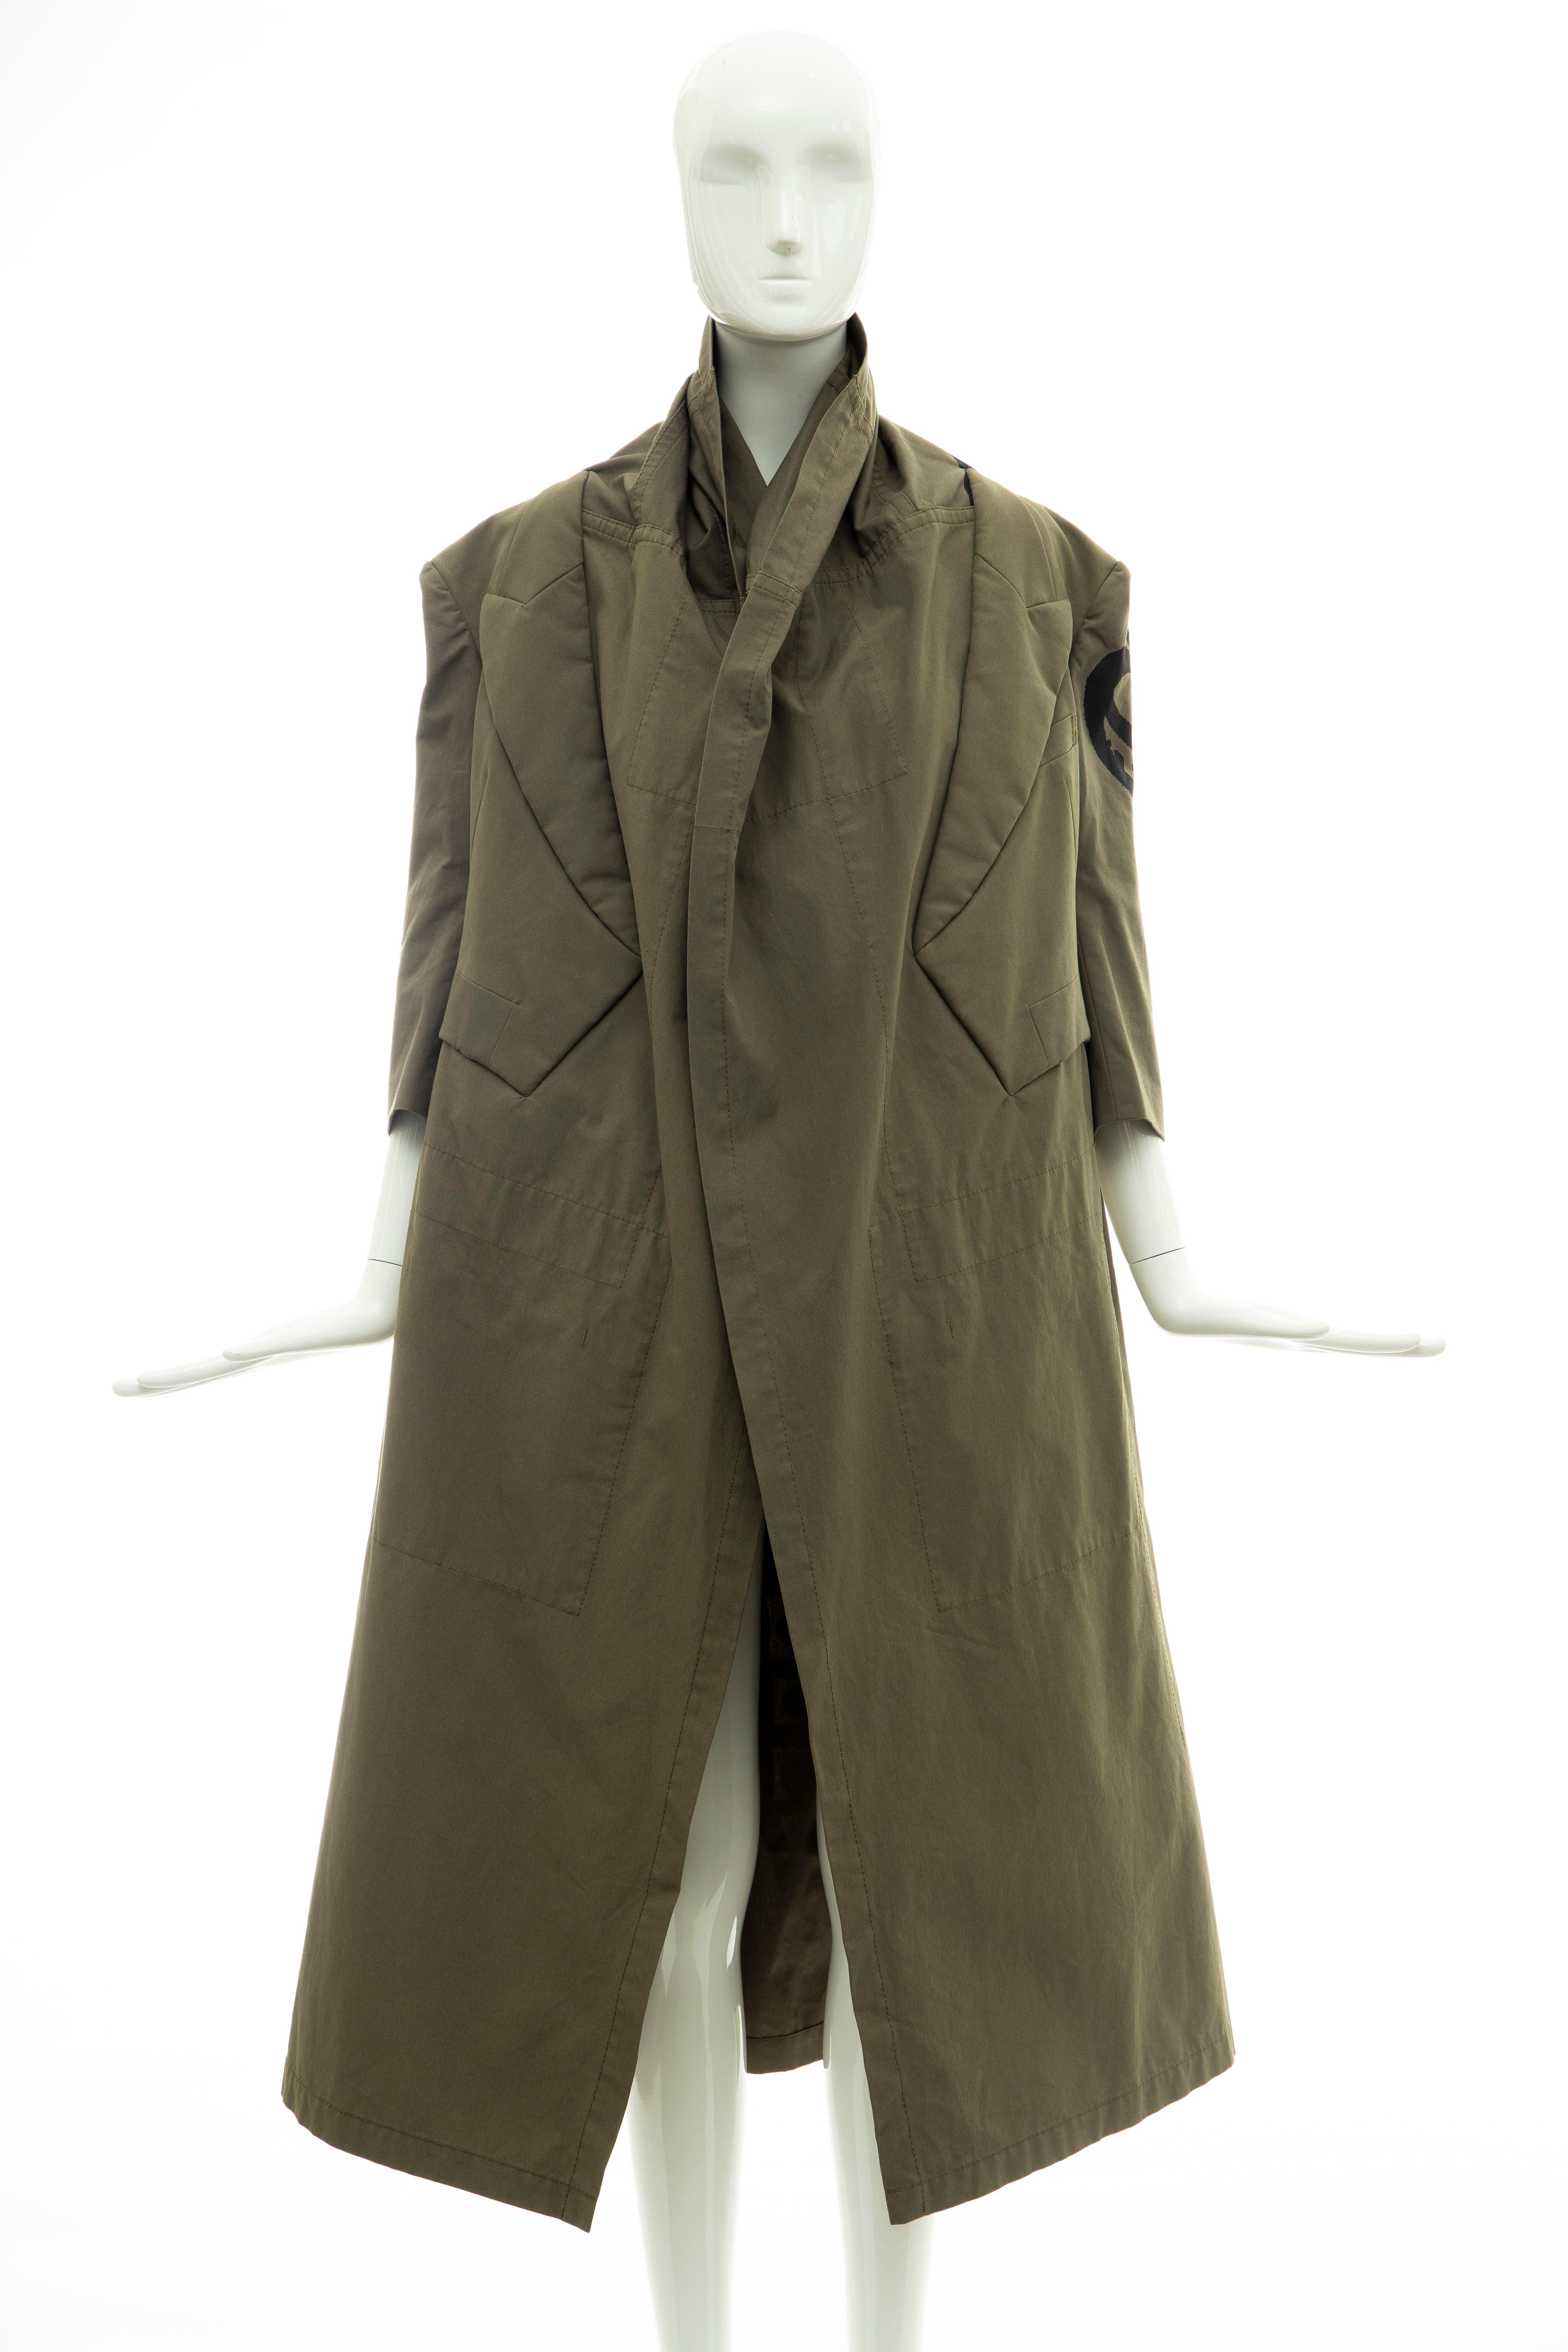 Women's Comme des Garcons Runway Olive Green Black Printed Back Cotton Coat, Fall 2009